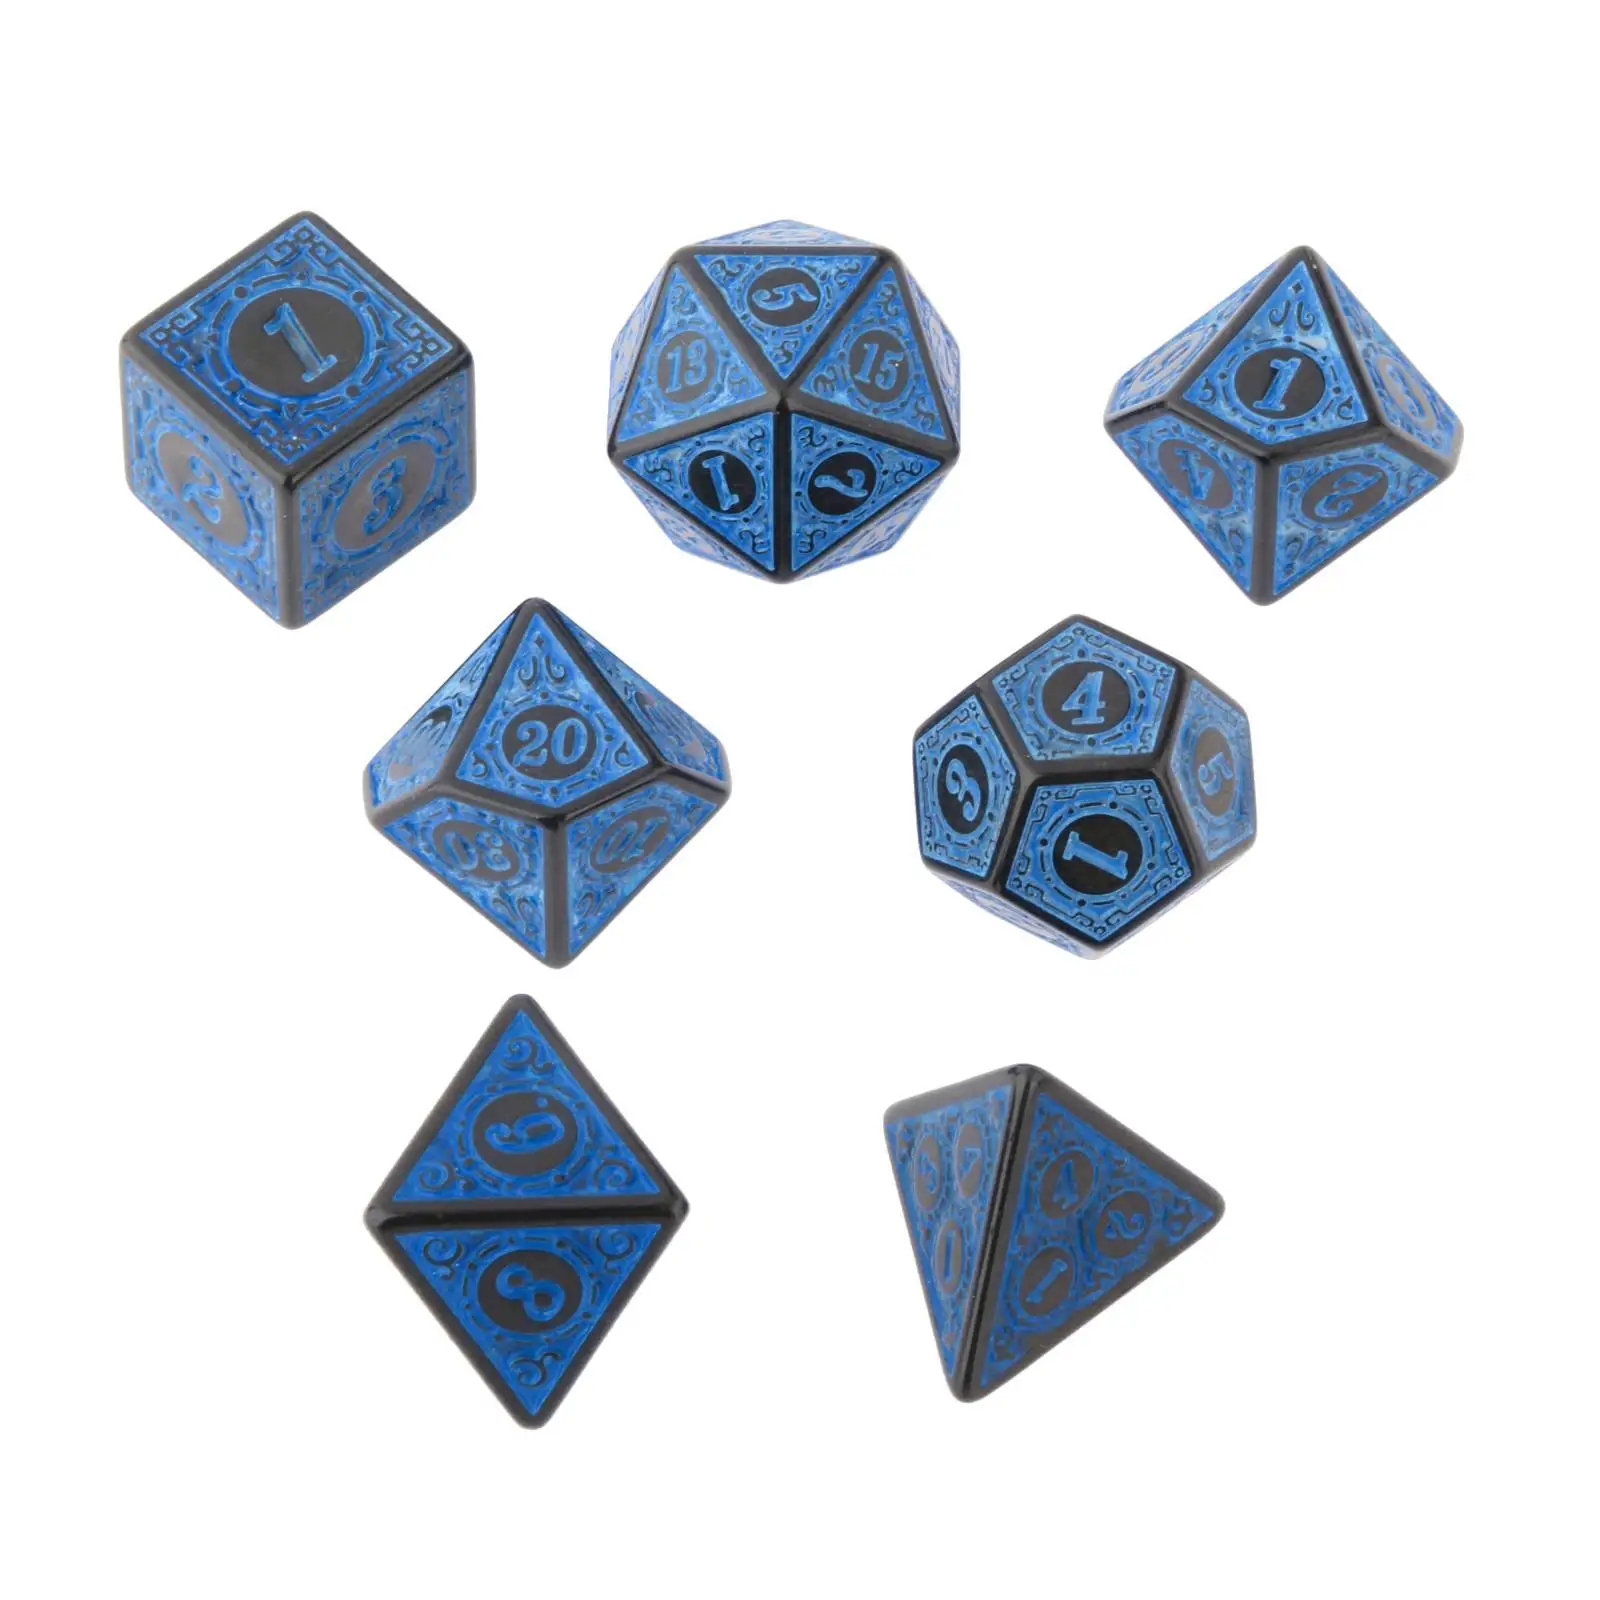 7 PCS Antique Acrylic Polyhedral Dice DND RPG Role Playing Game Toys